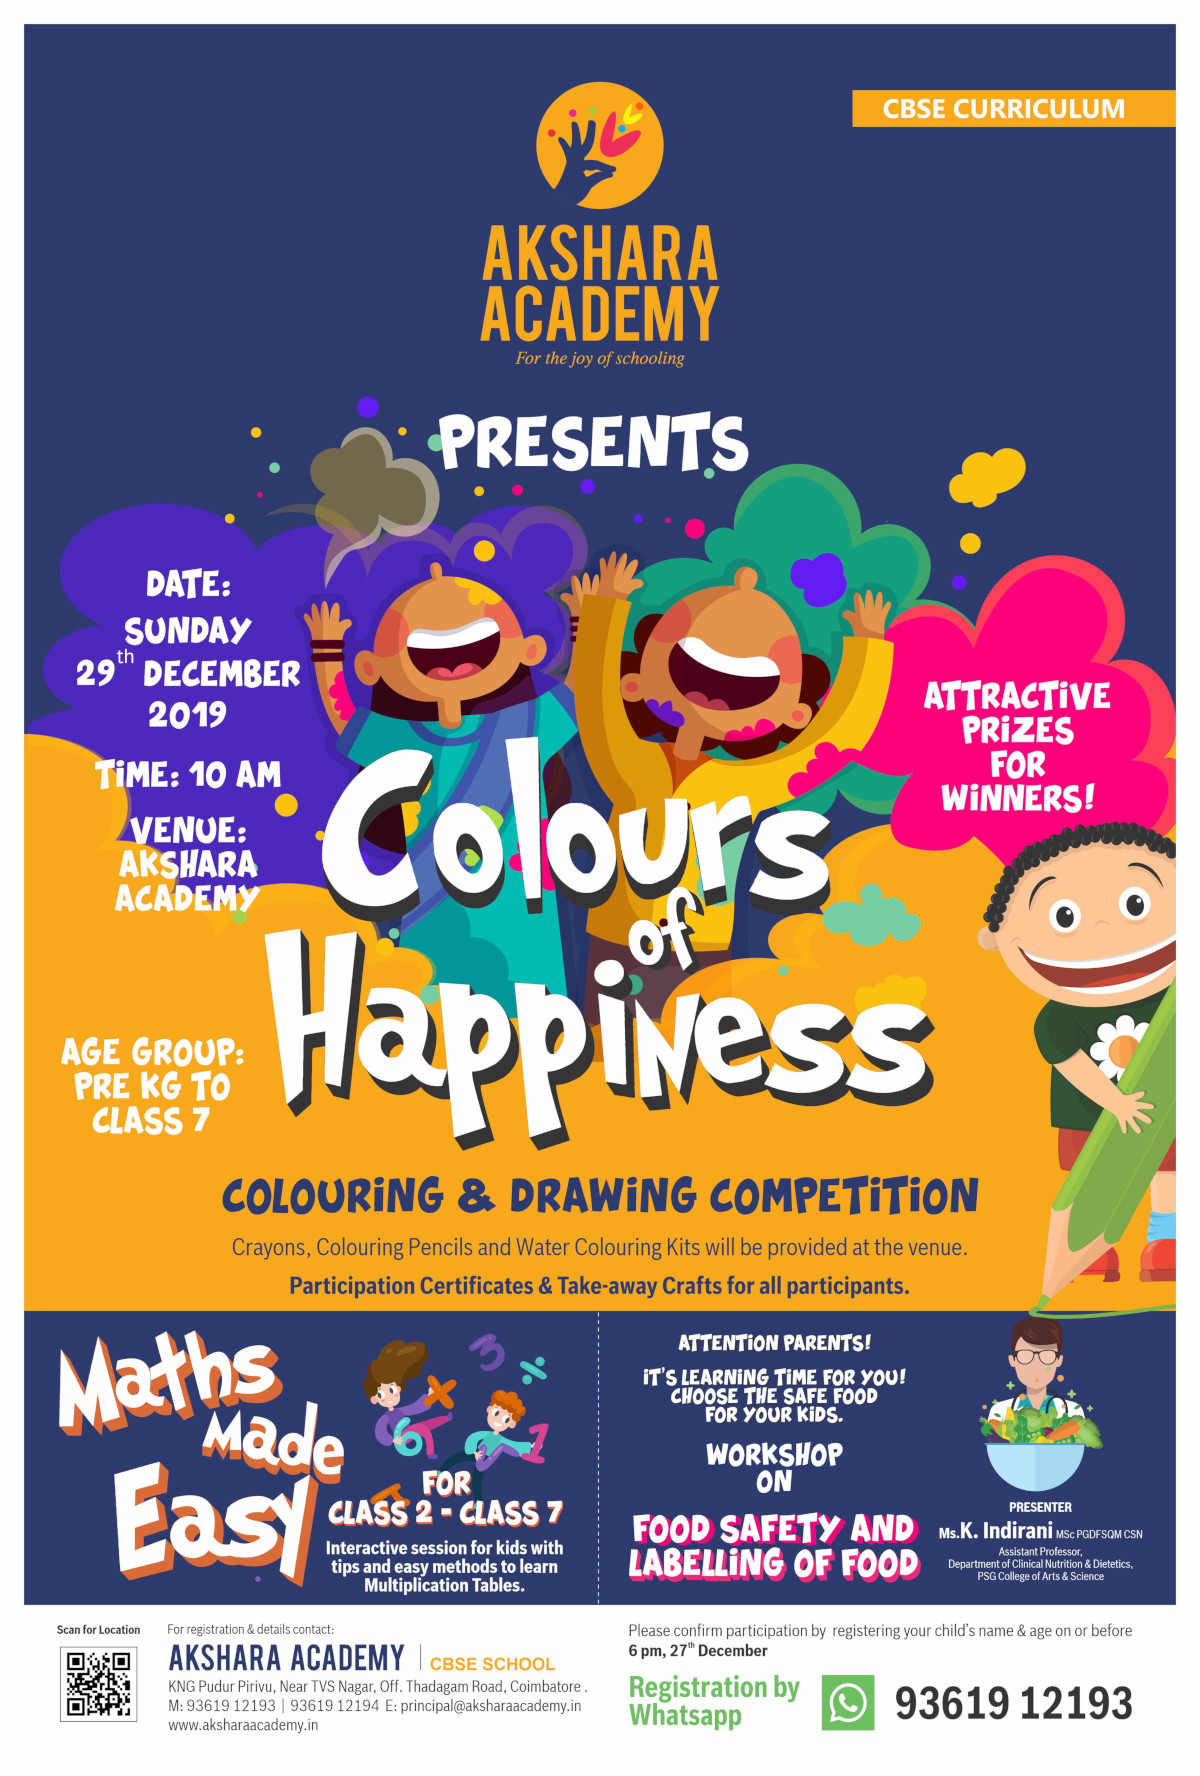 Colours of Happiness - Colouring & Drawing Competition